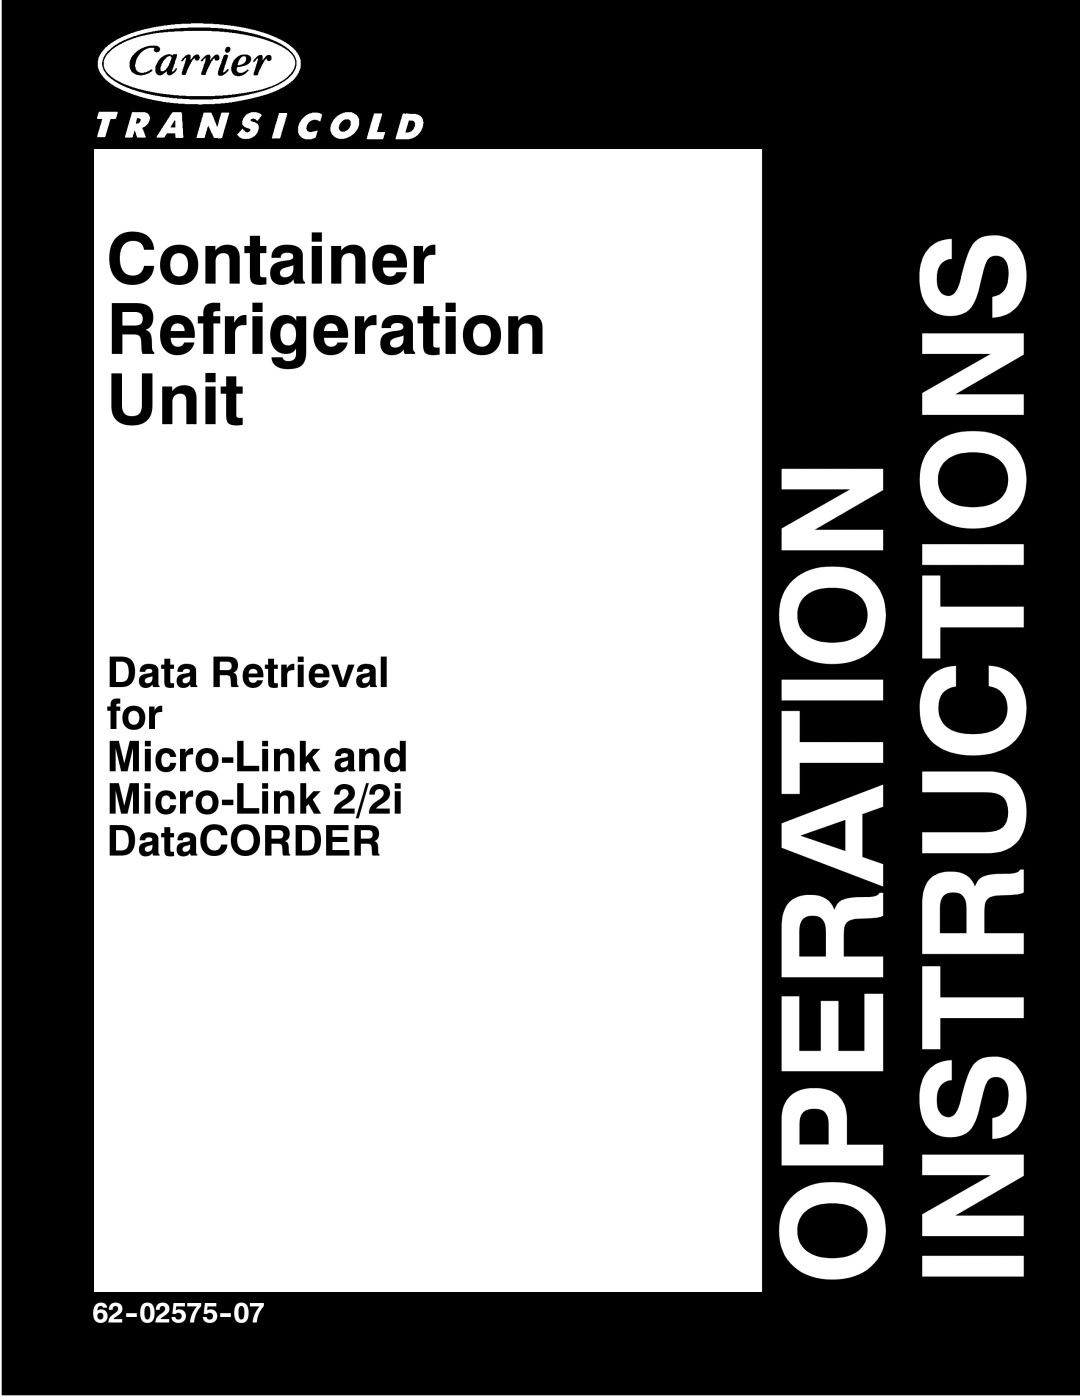 Carrier Container Refrigeration Unit manual Data Retrieval for Micro-Link and Micro-Link 2/2i DataCORDER, 62-02575-07 